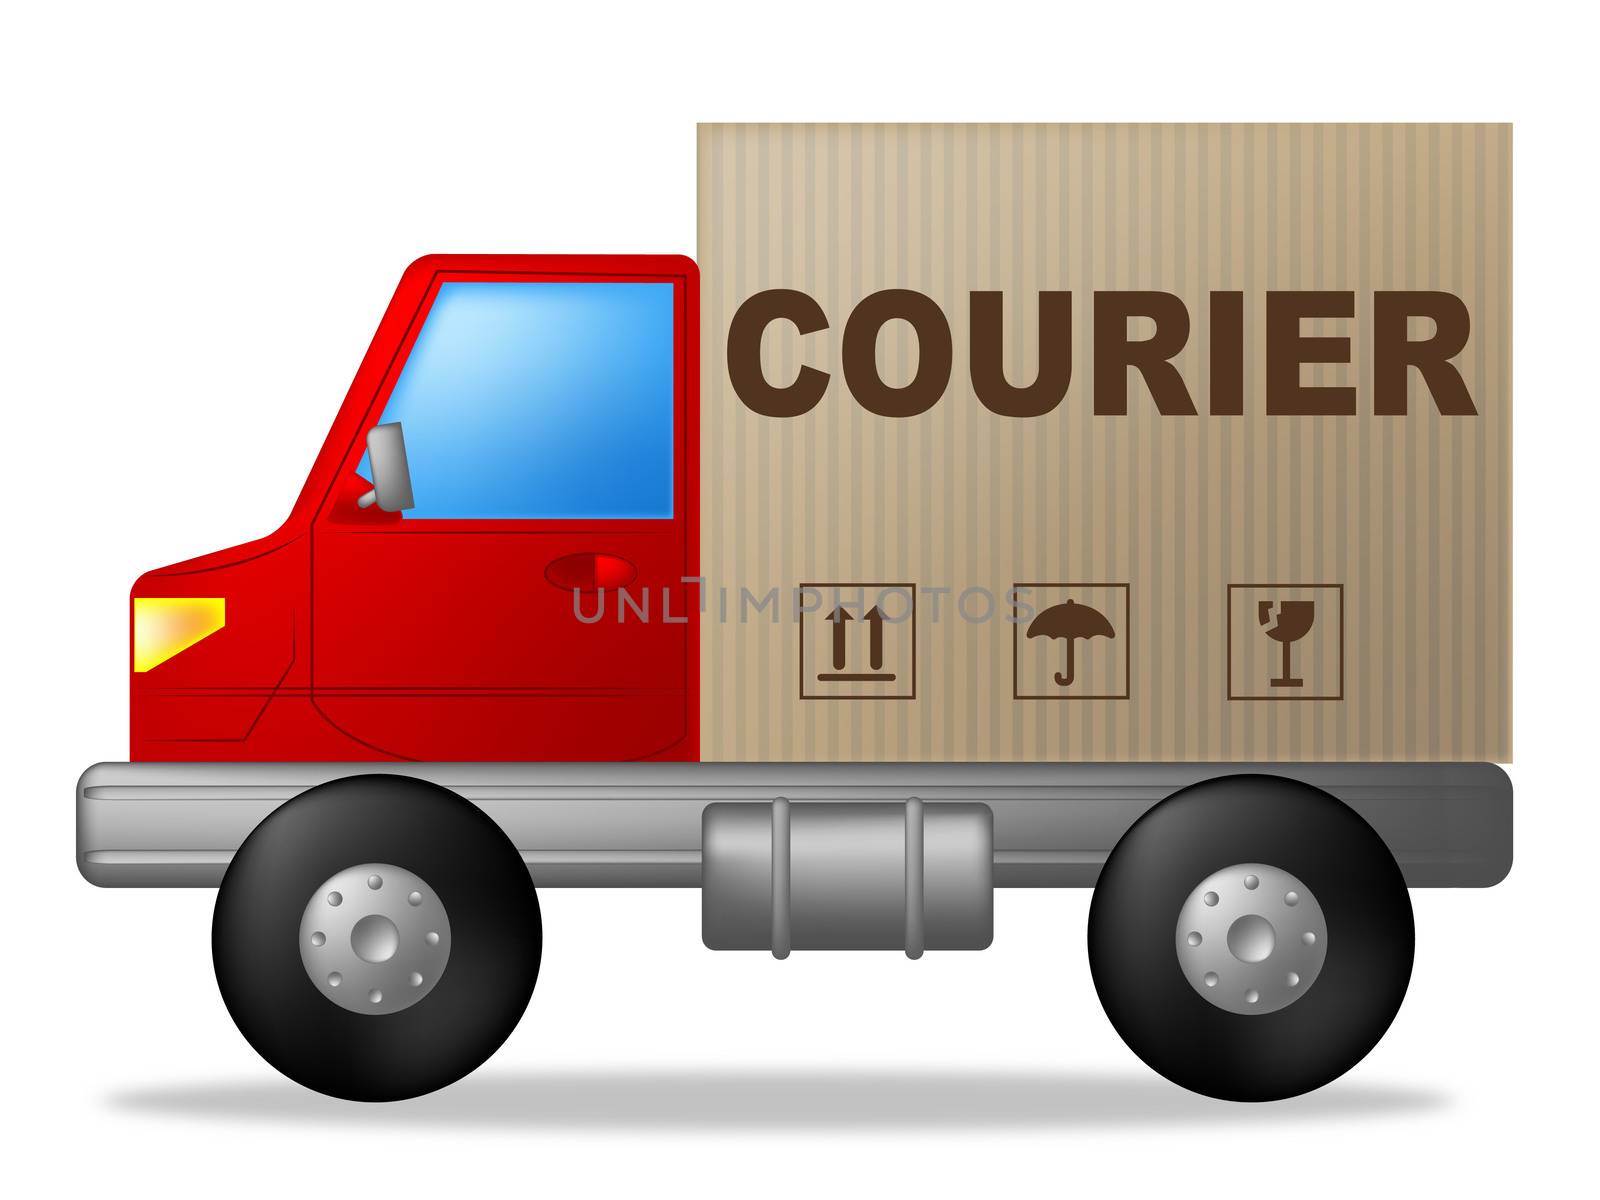 Courier Truck Showing Sending Deliver And Delivery